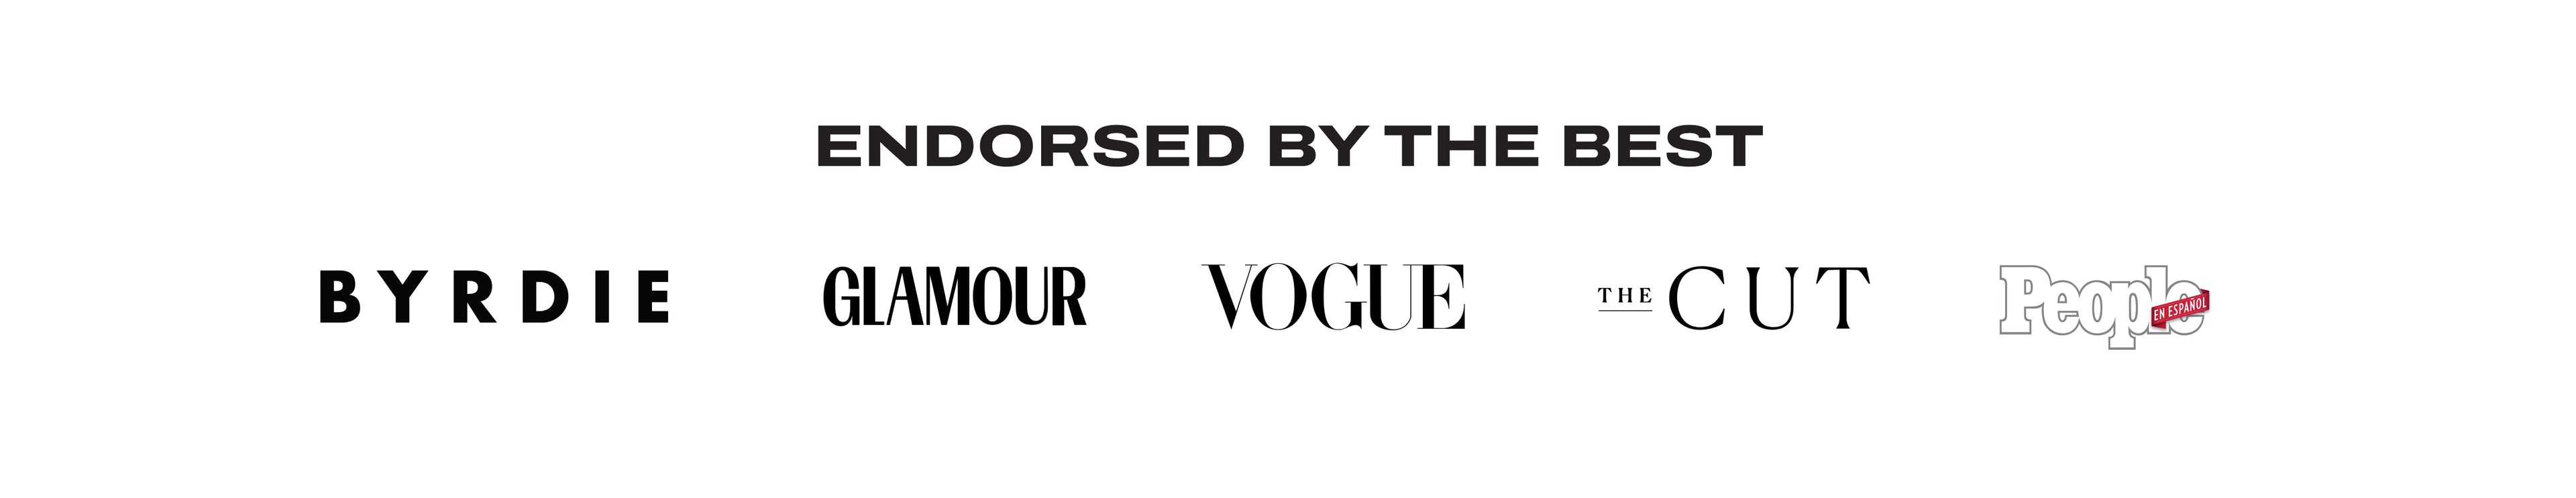 Endorsed by the best including Byrdie, Glamour, Vogue, The Cut and People.